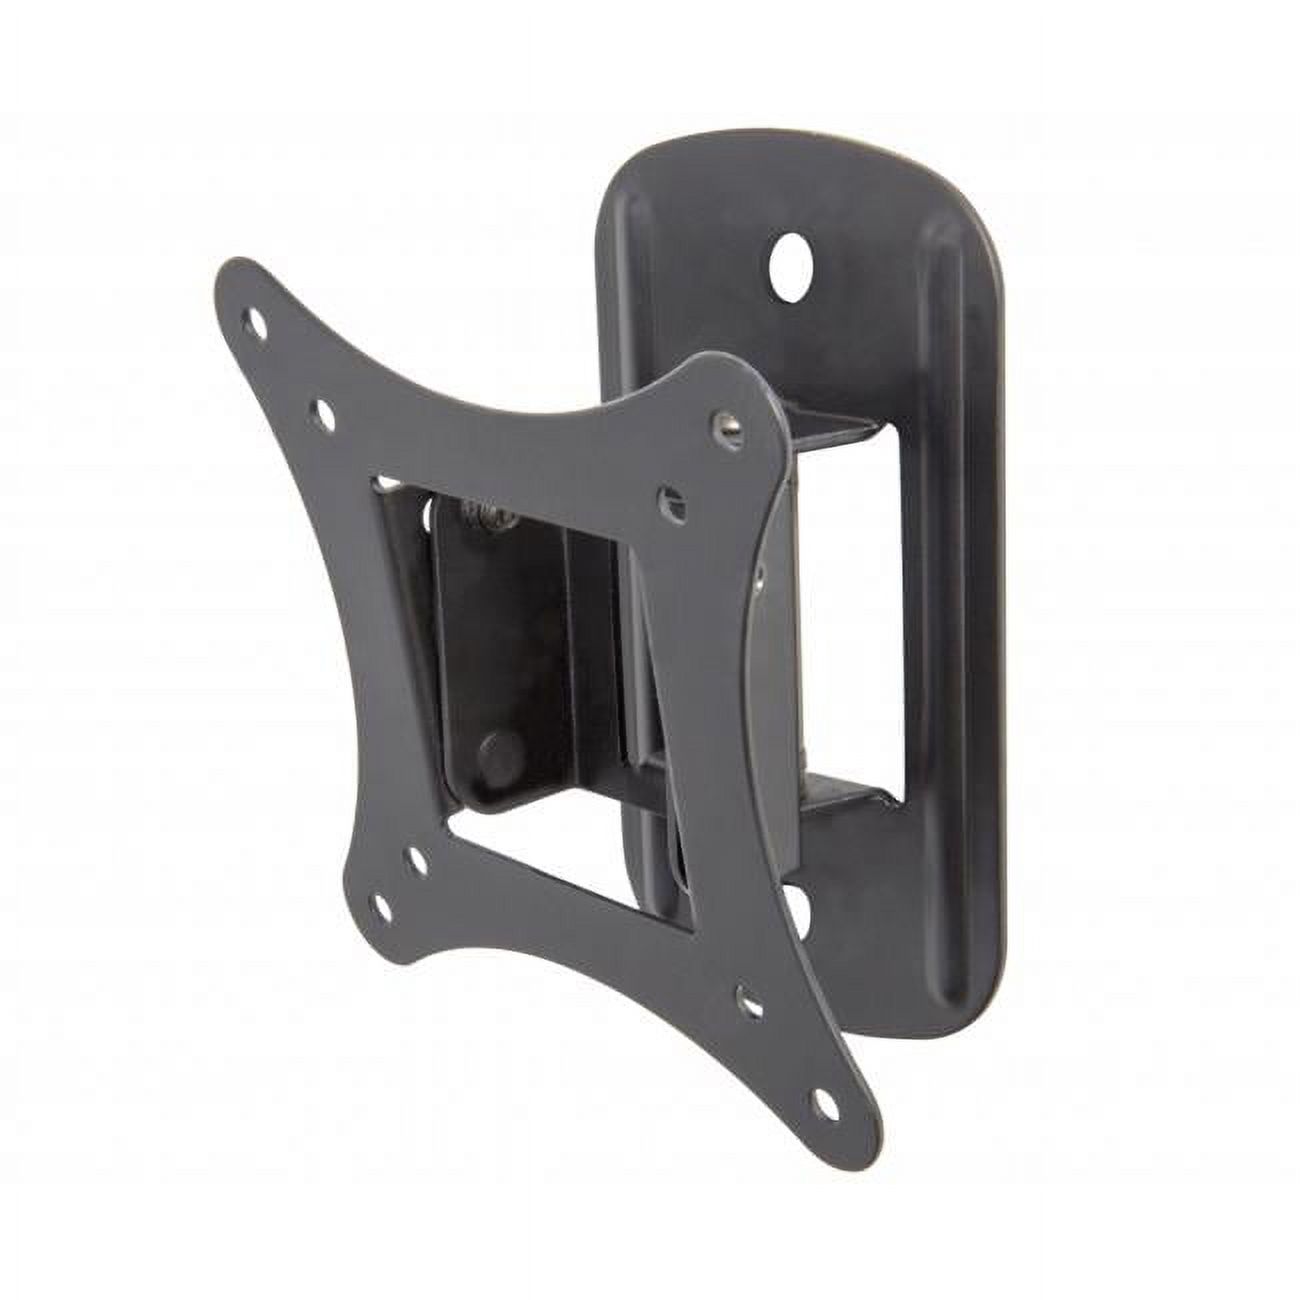 AVF MRL12-A  Monitor or TV Wall Mount, Tilt and Turn for 13-inch to 27-inch Screens, Black - image 1 of 3